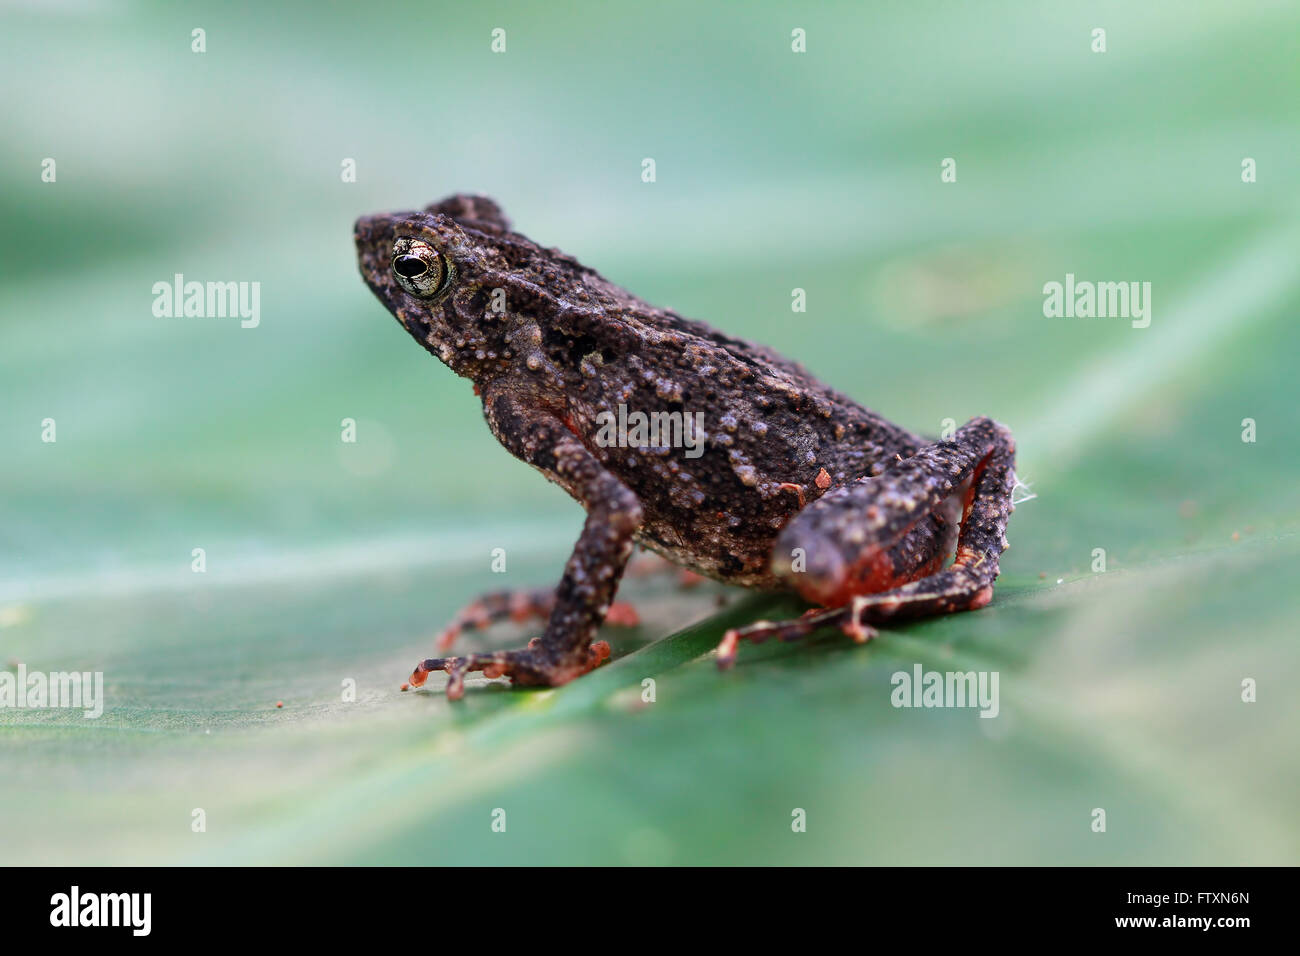 Portrait of a slender toad sitting on a leaf, Indonesia Stock Photo